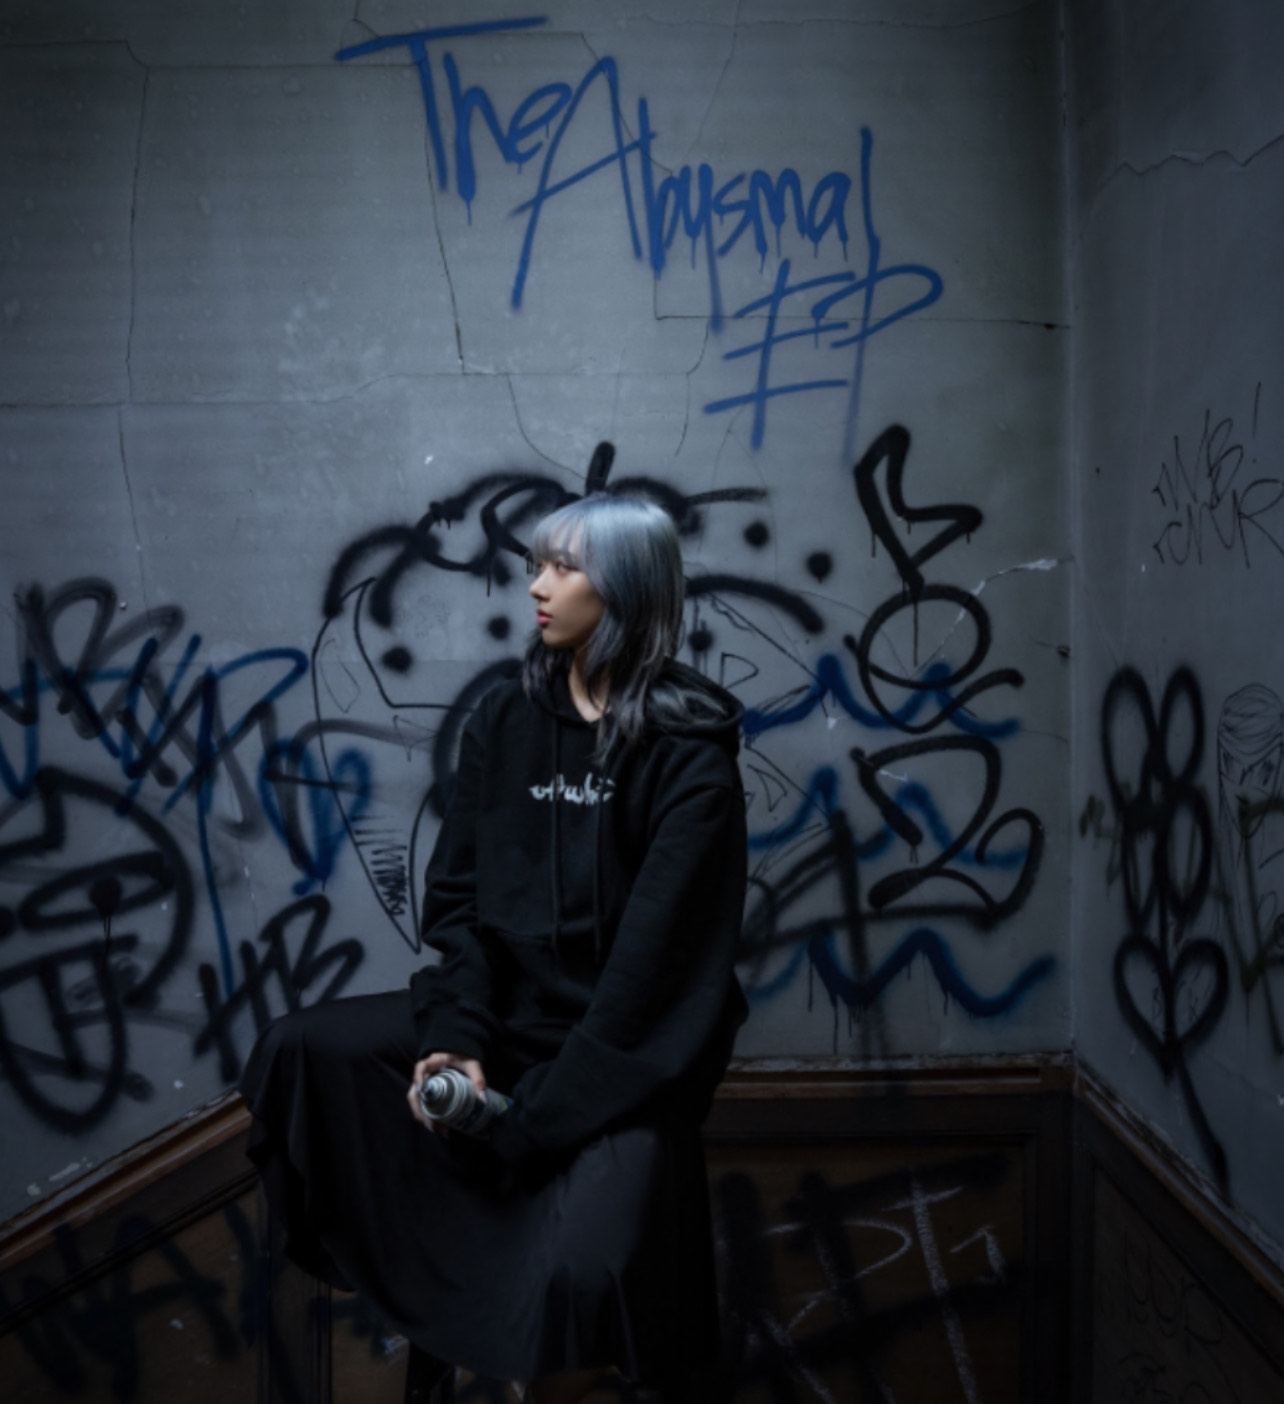 Hannah Bahng Announces Debut Record “The Abysmal EP” Set to Release on May 31